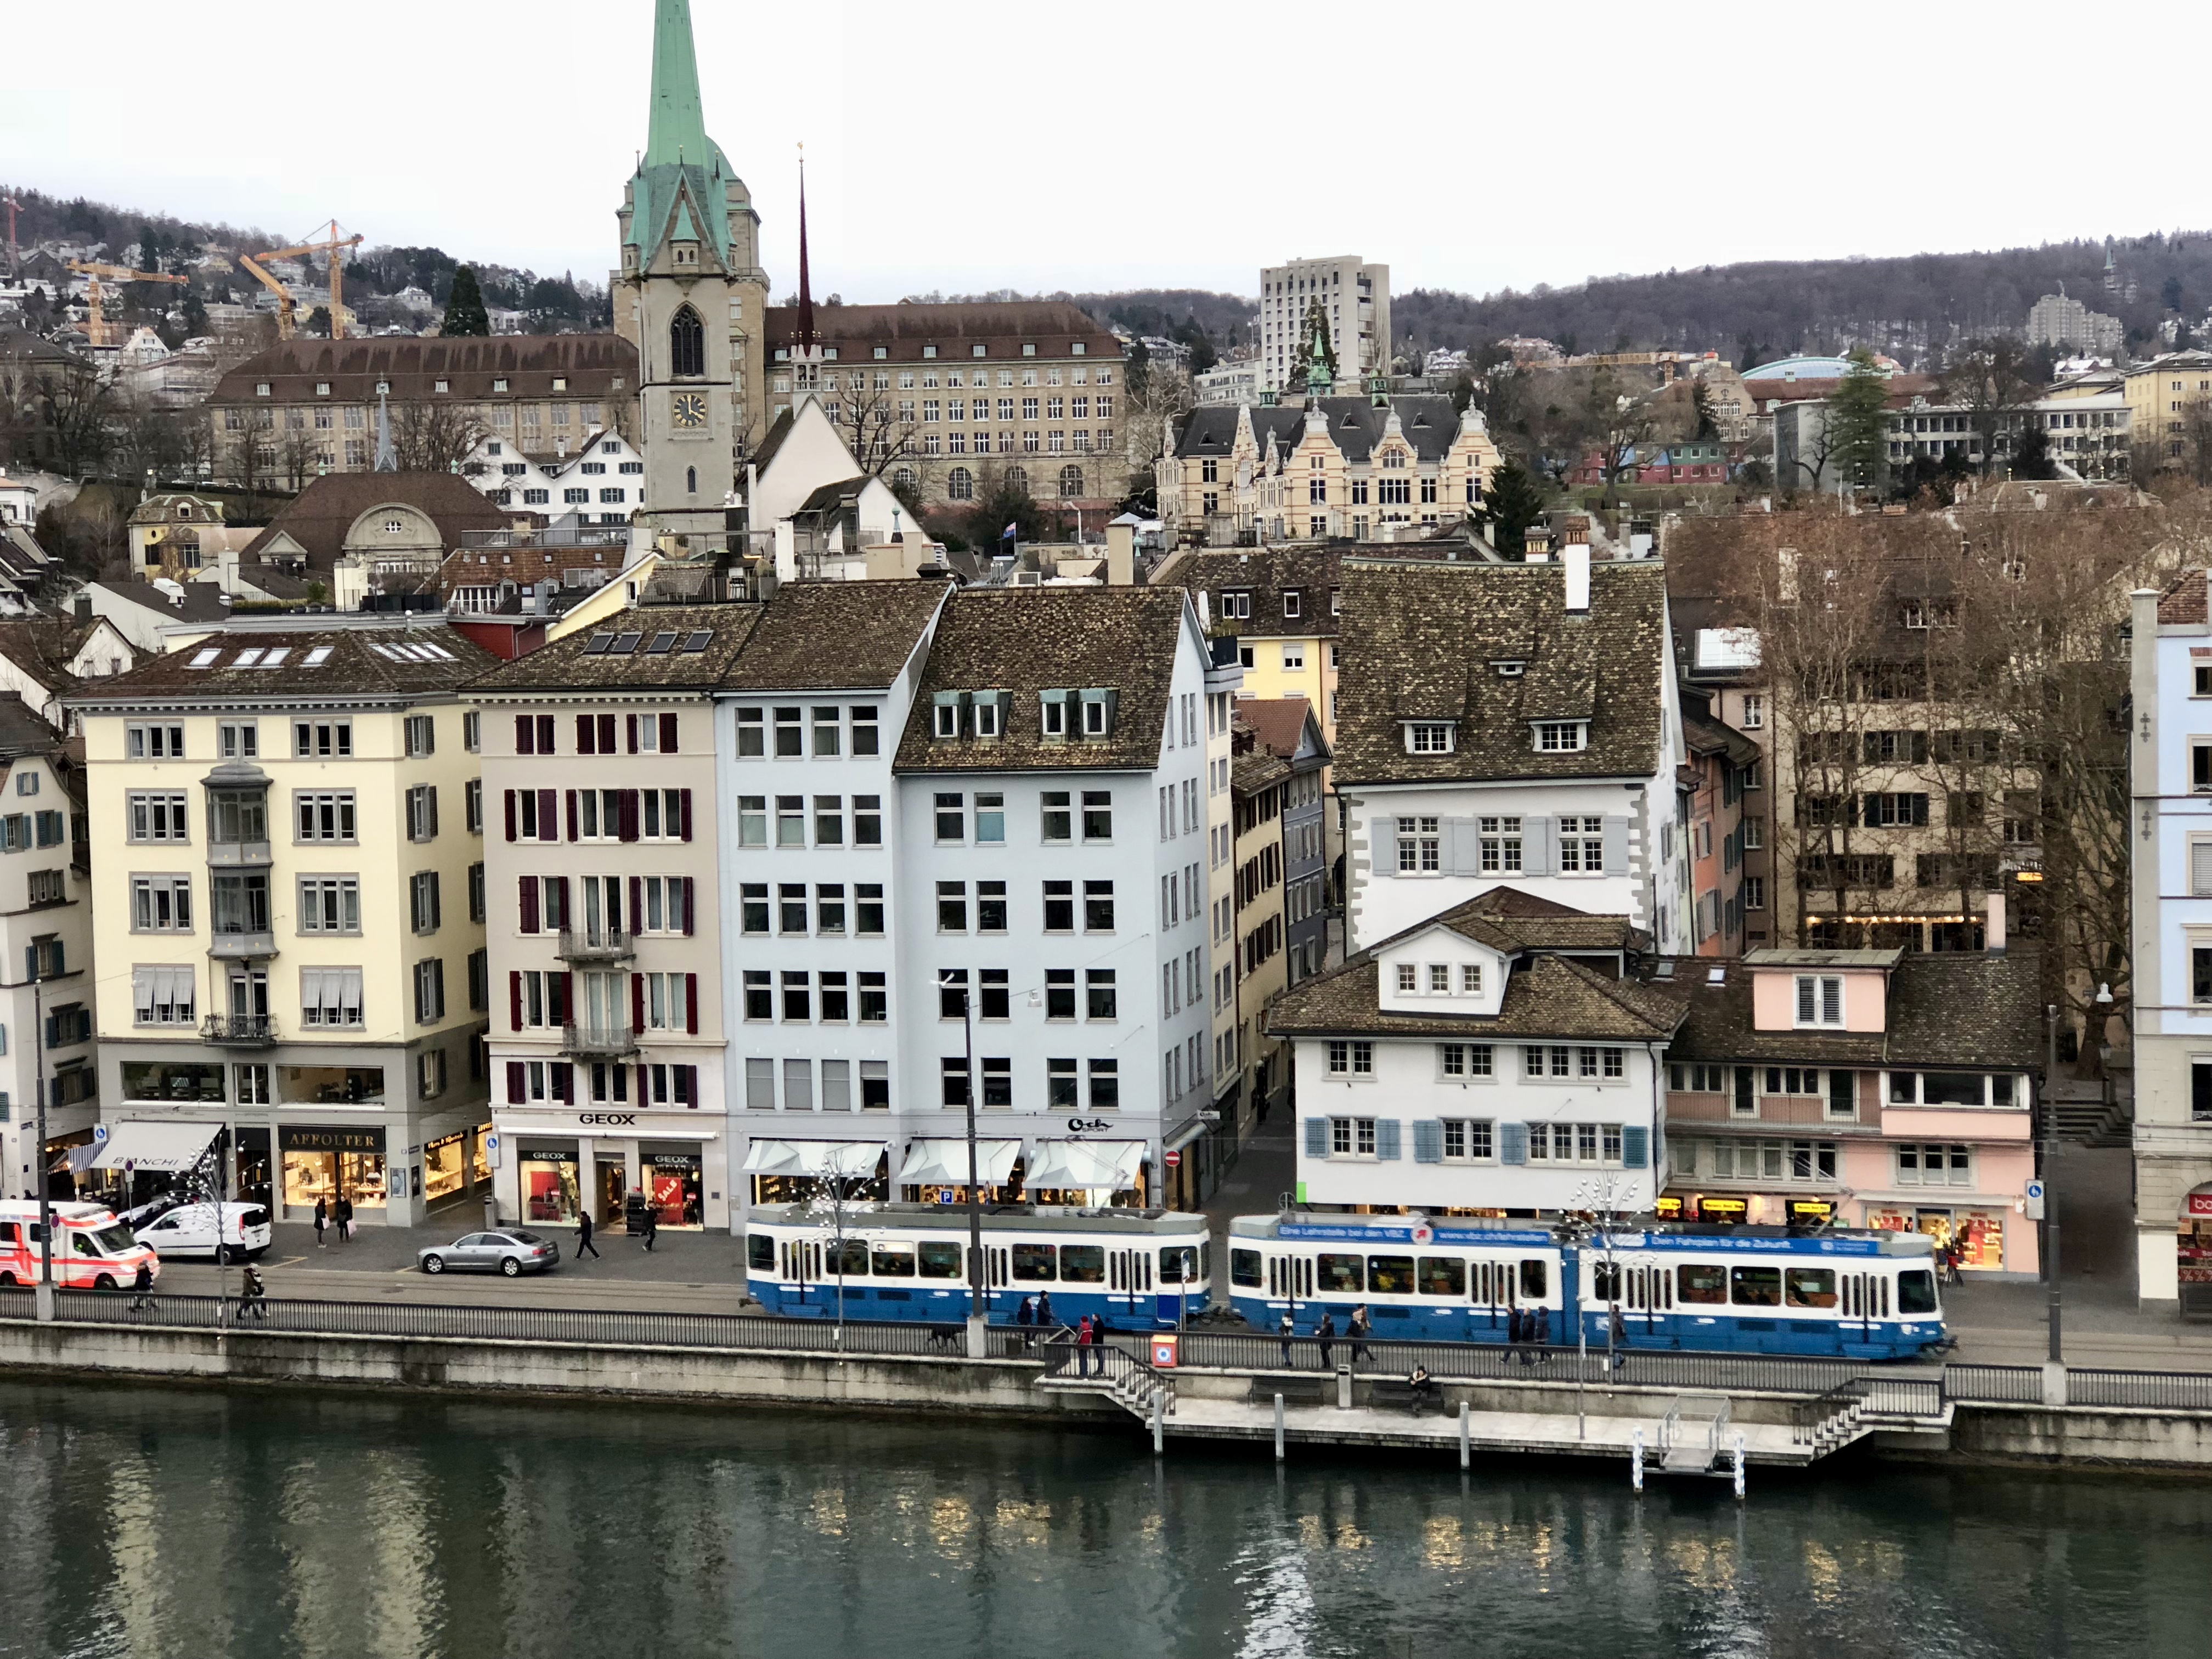 A view of buildings and a tram in Zurich, Switzerland.